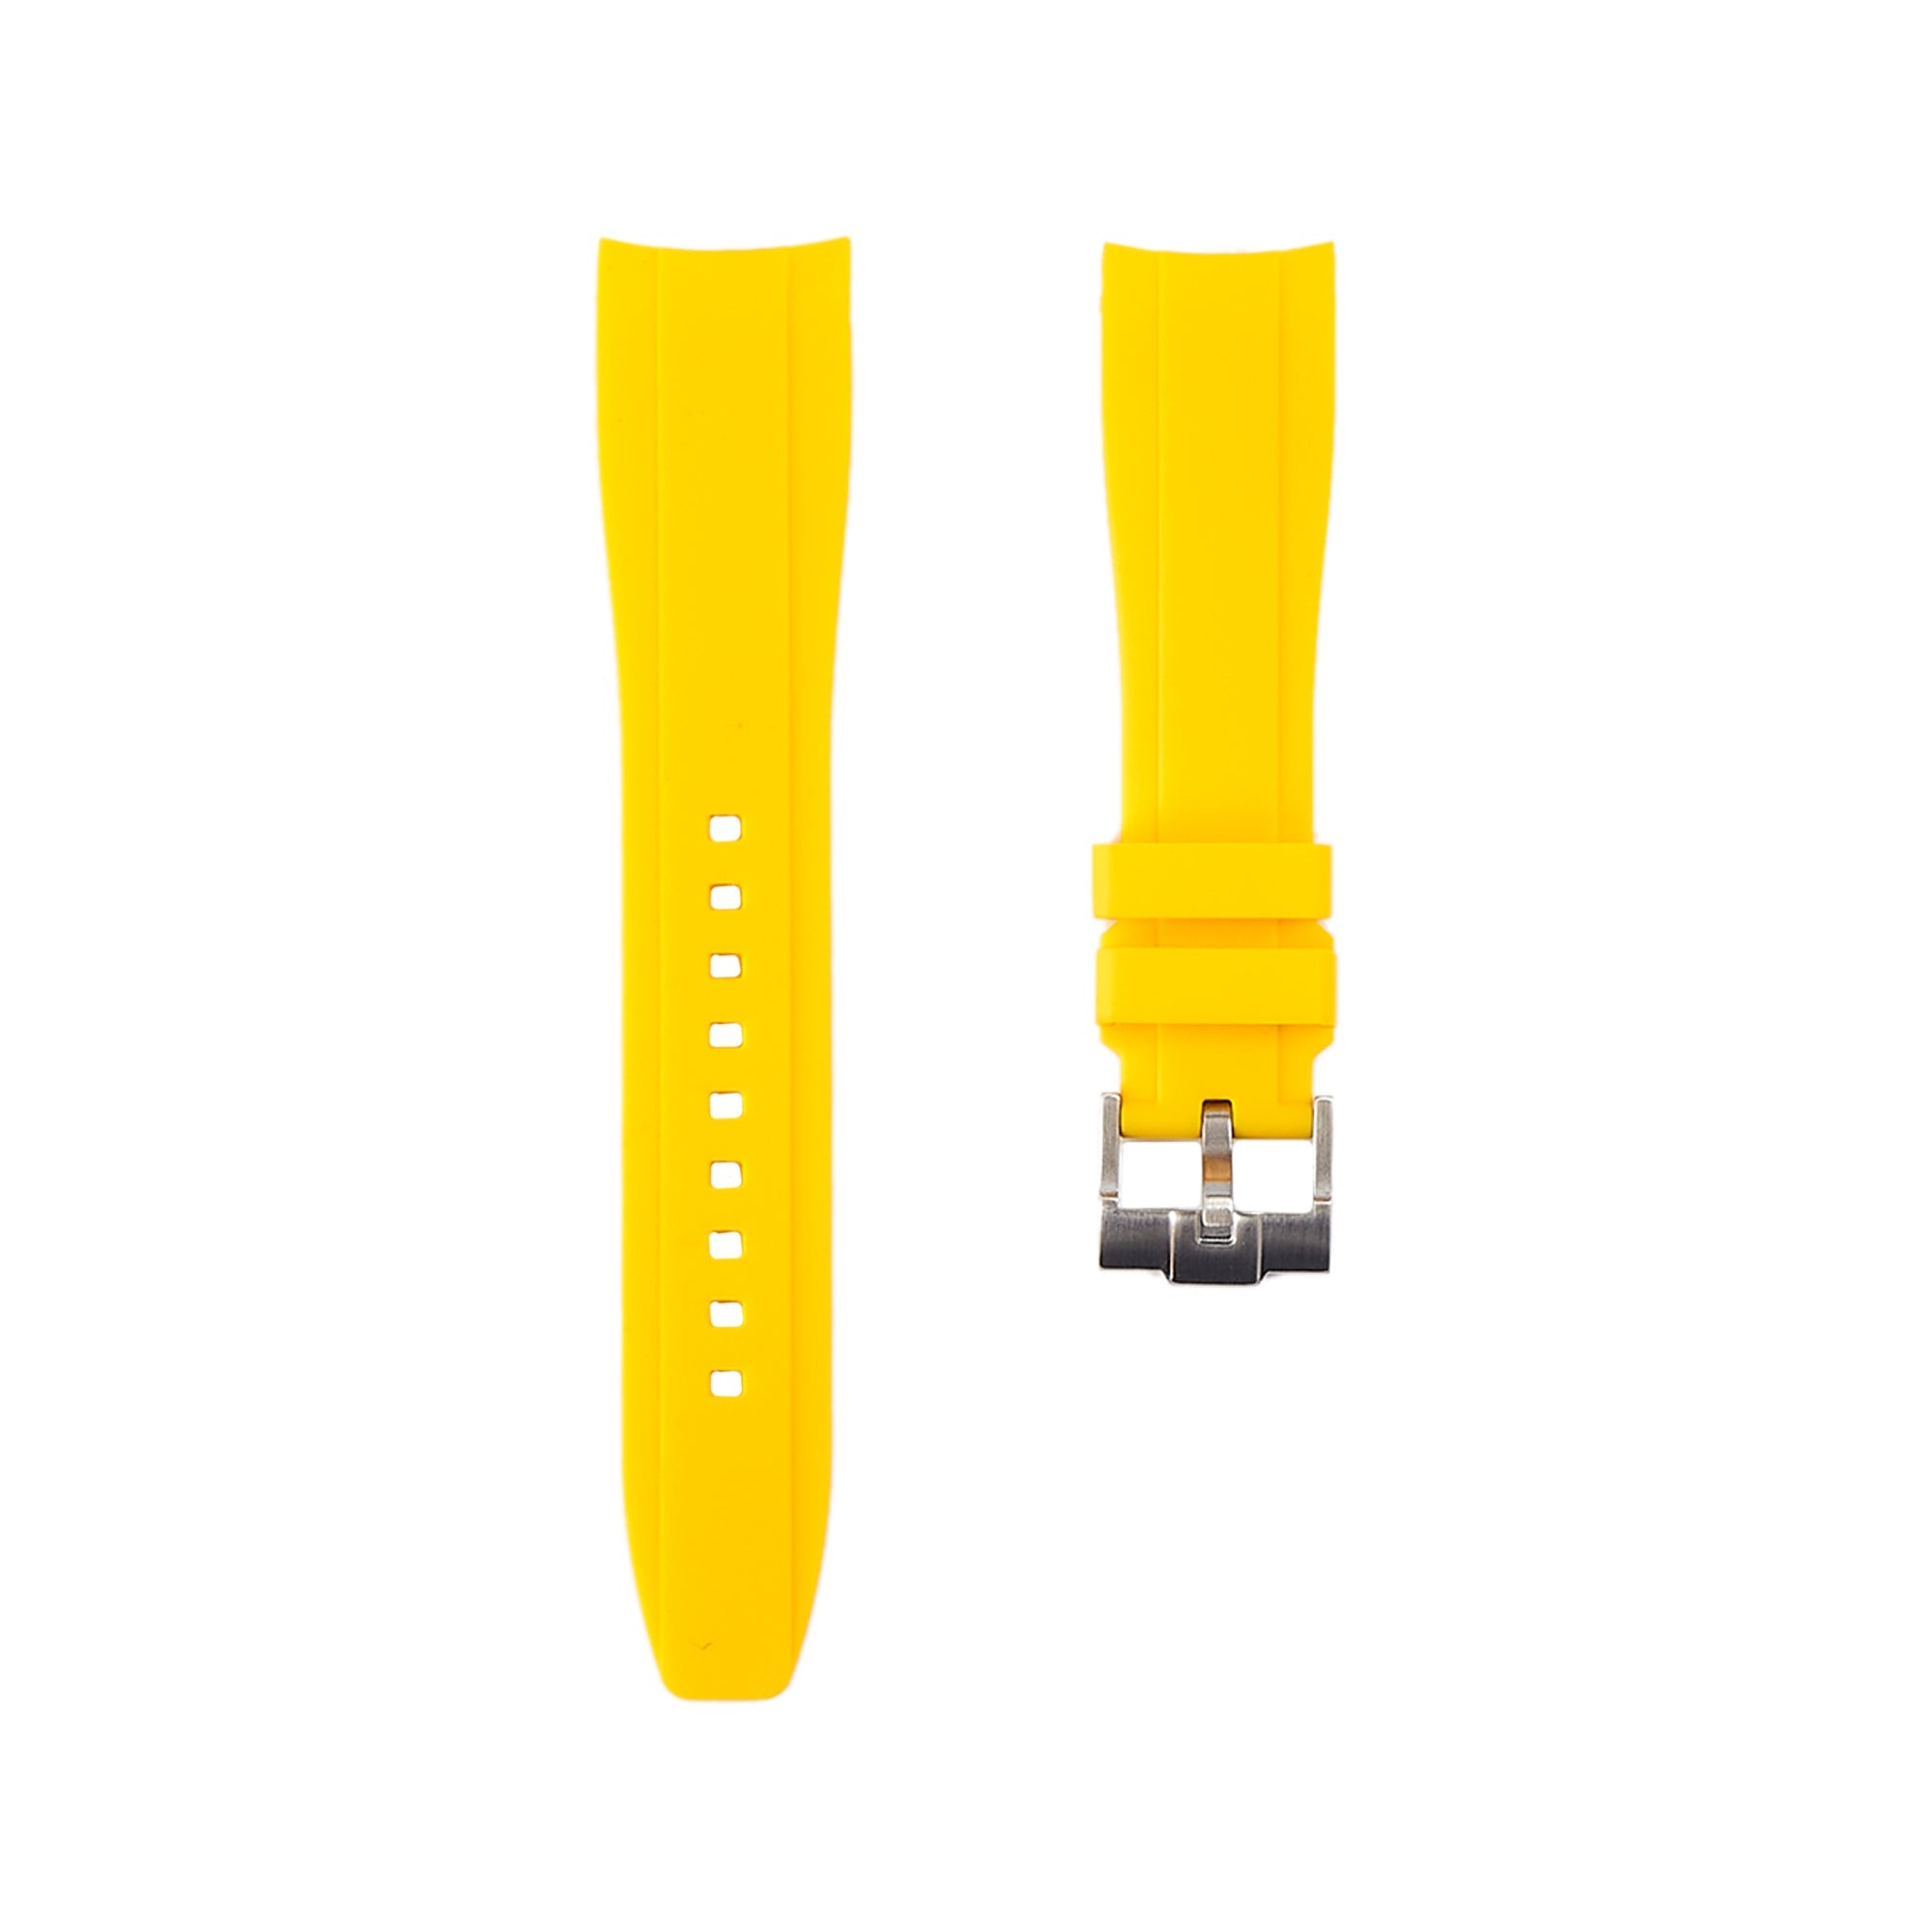 Curved End Soft Silicone Strap - Compatible with Omega x Swatch – Yellow (2418) -StrapSeeker